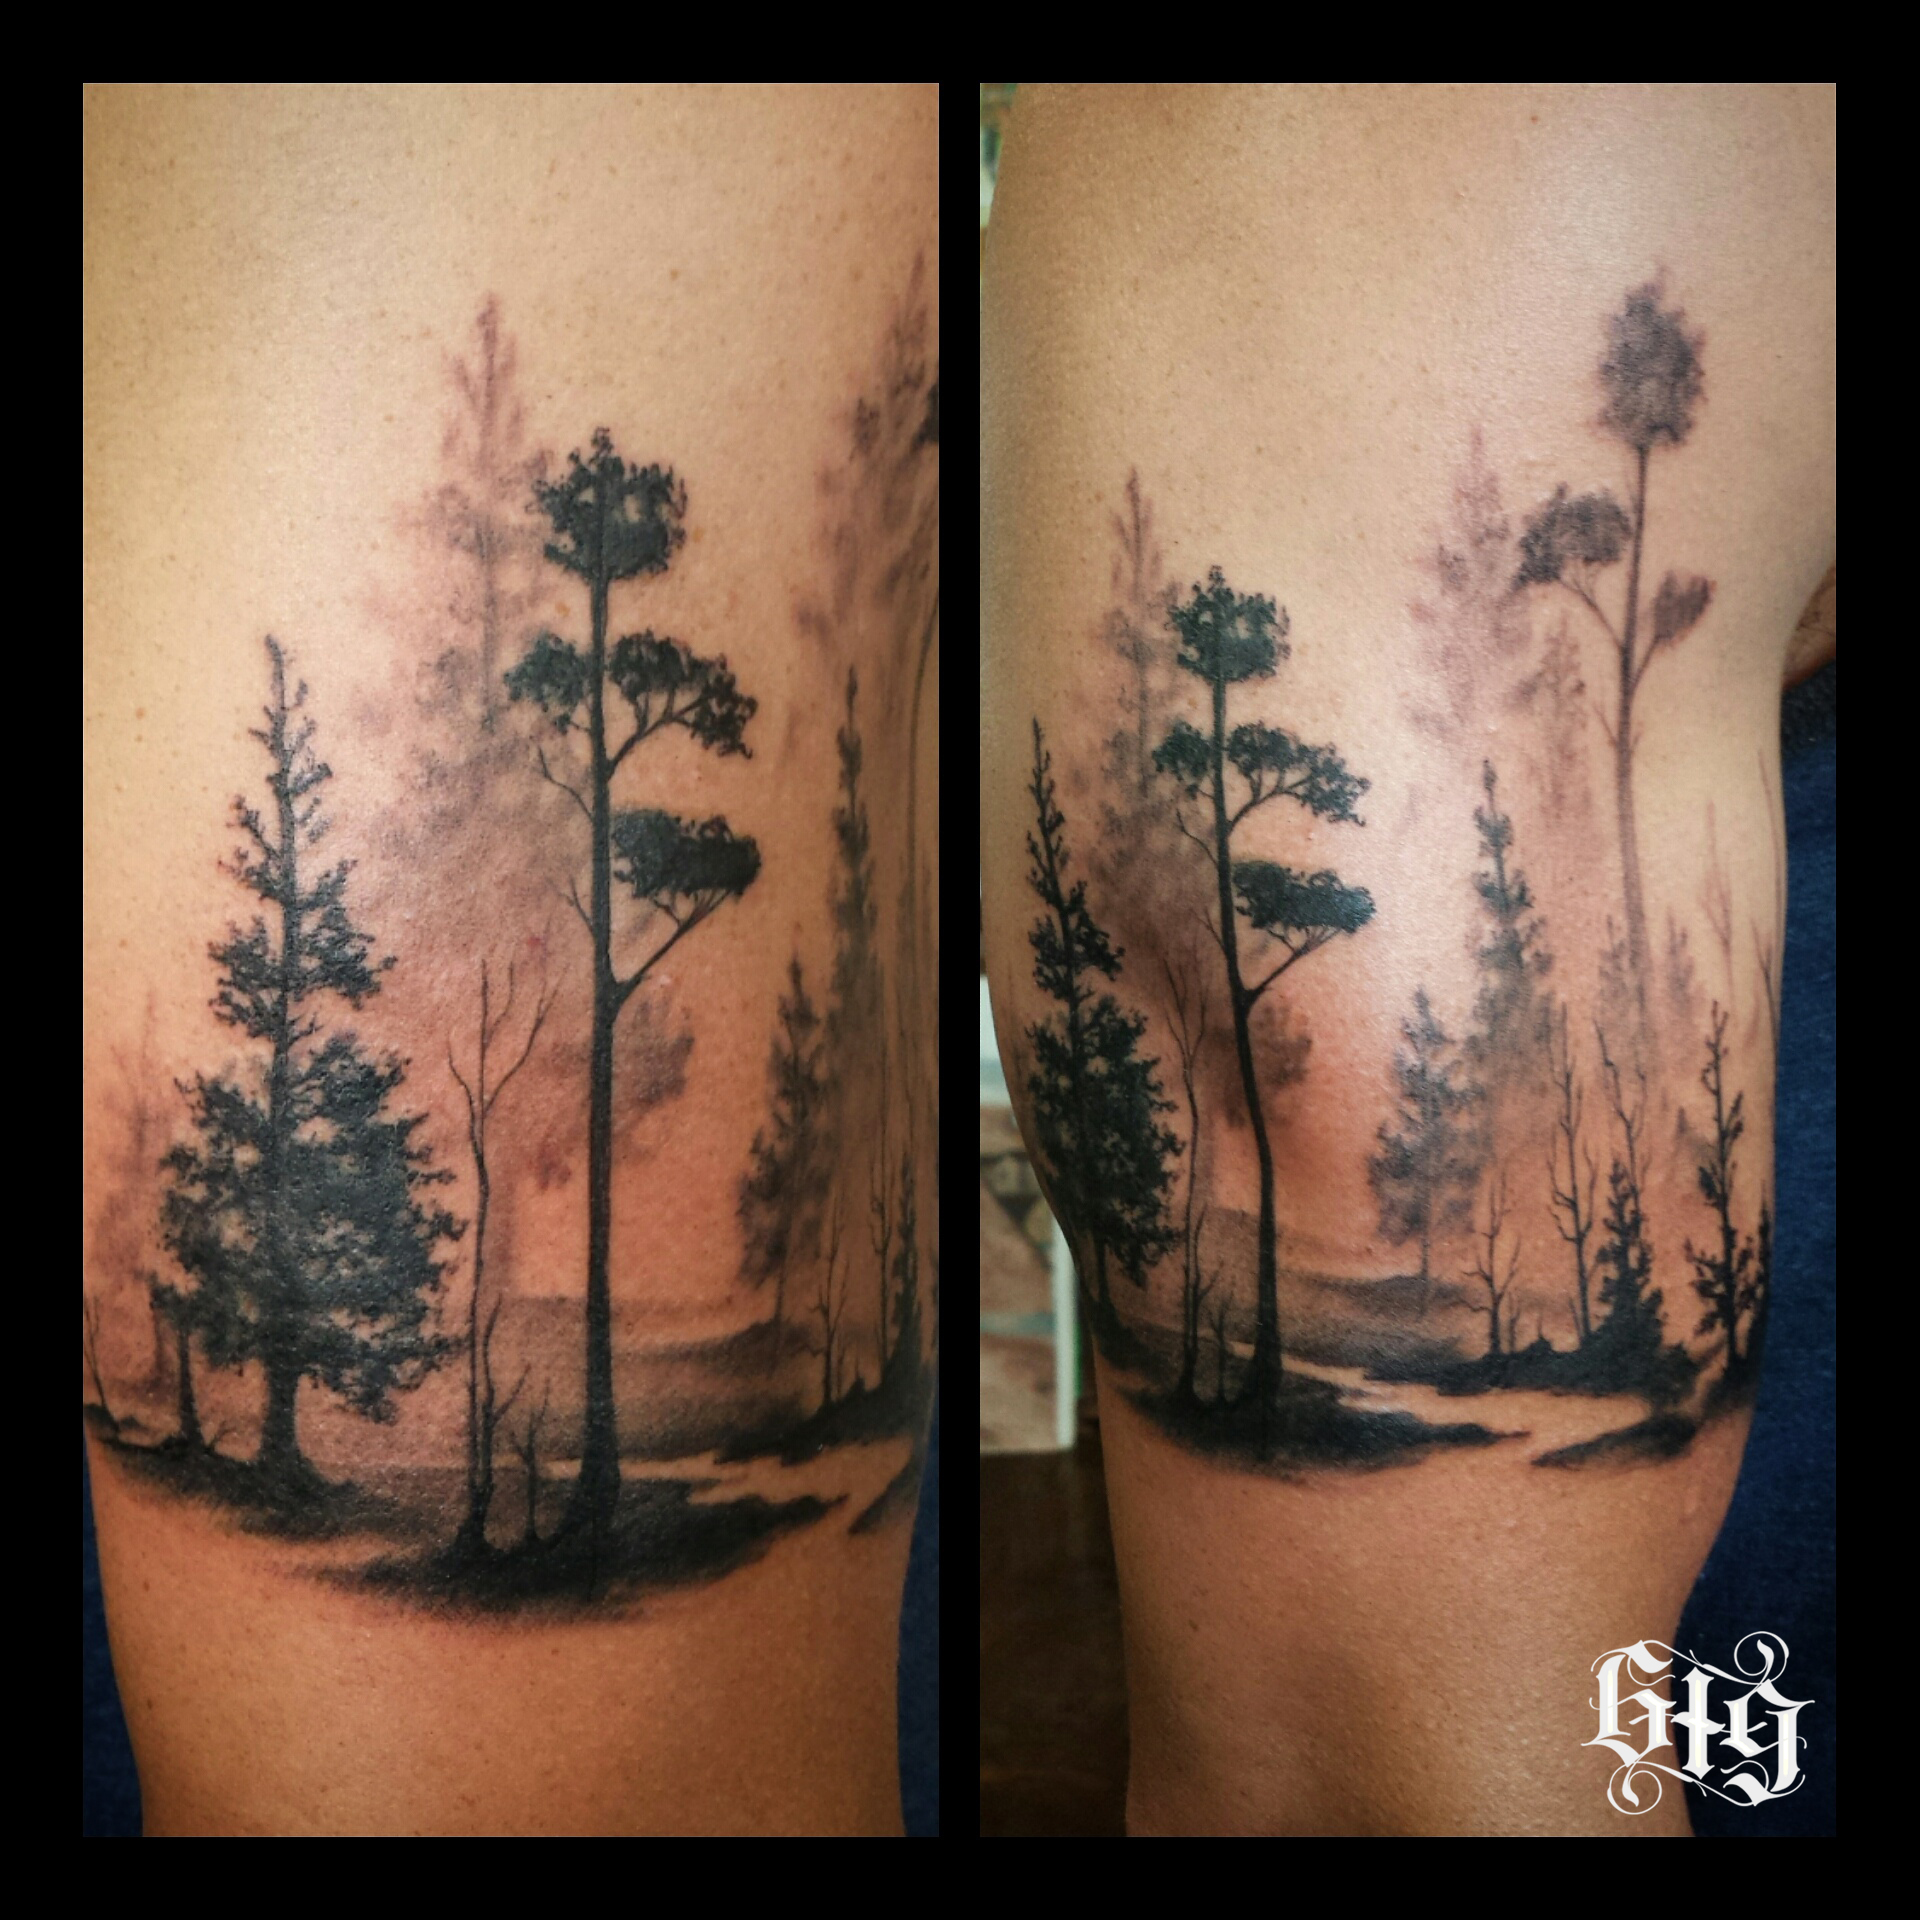 Tattoo Nouvelle  Tattoo by Albert Check abductedtattoos for appointment  availability    treeoflife tattoo colorfultattoo colortattoos  treetattoo dna dnastrand treeoflifetattoo tatooart tattooartist  tattooshop tattoowork tattooideas 